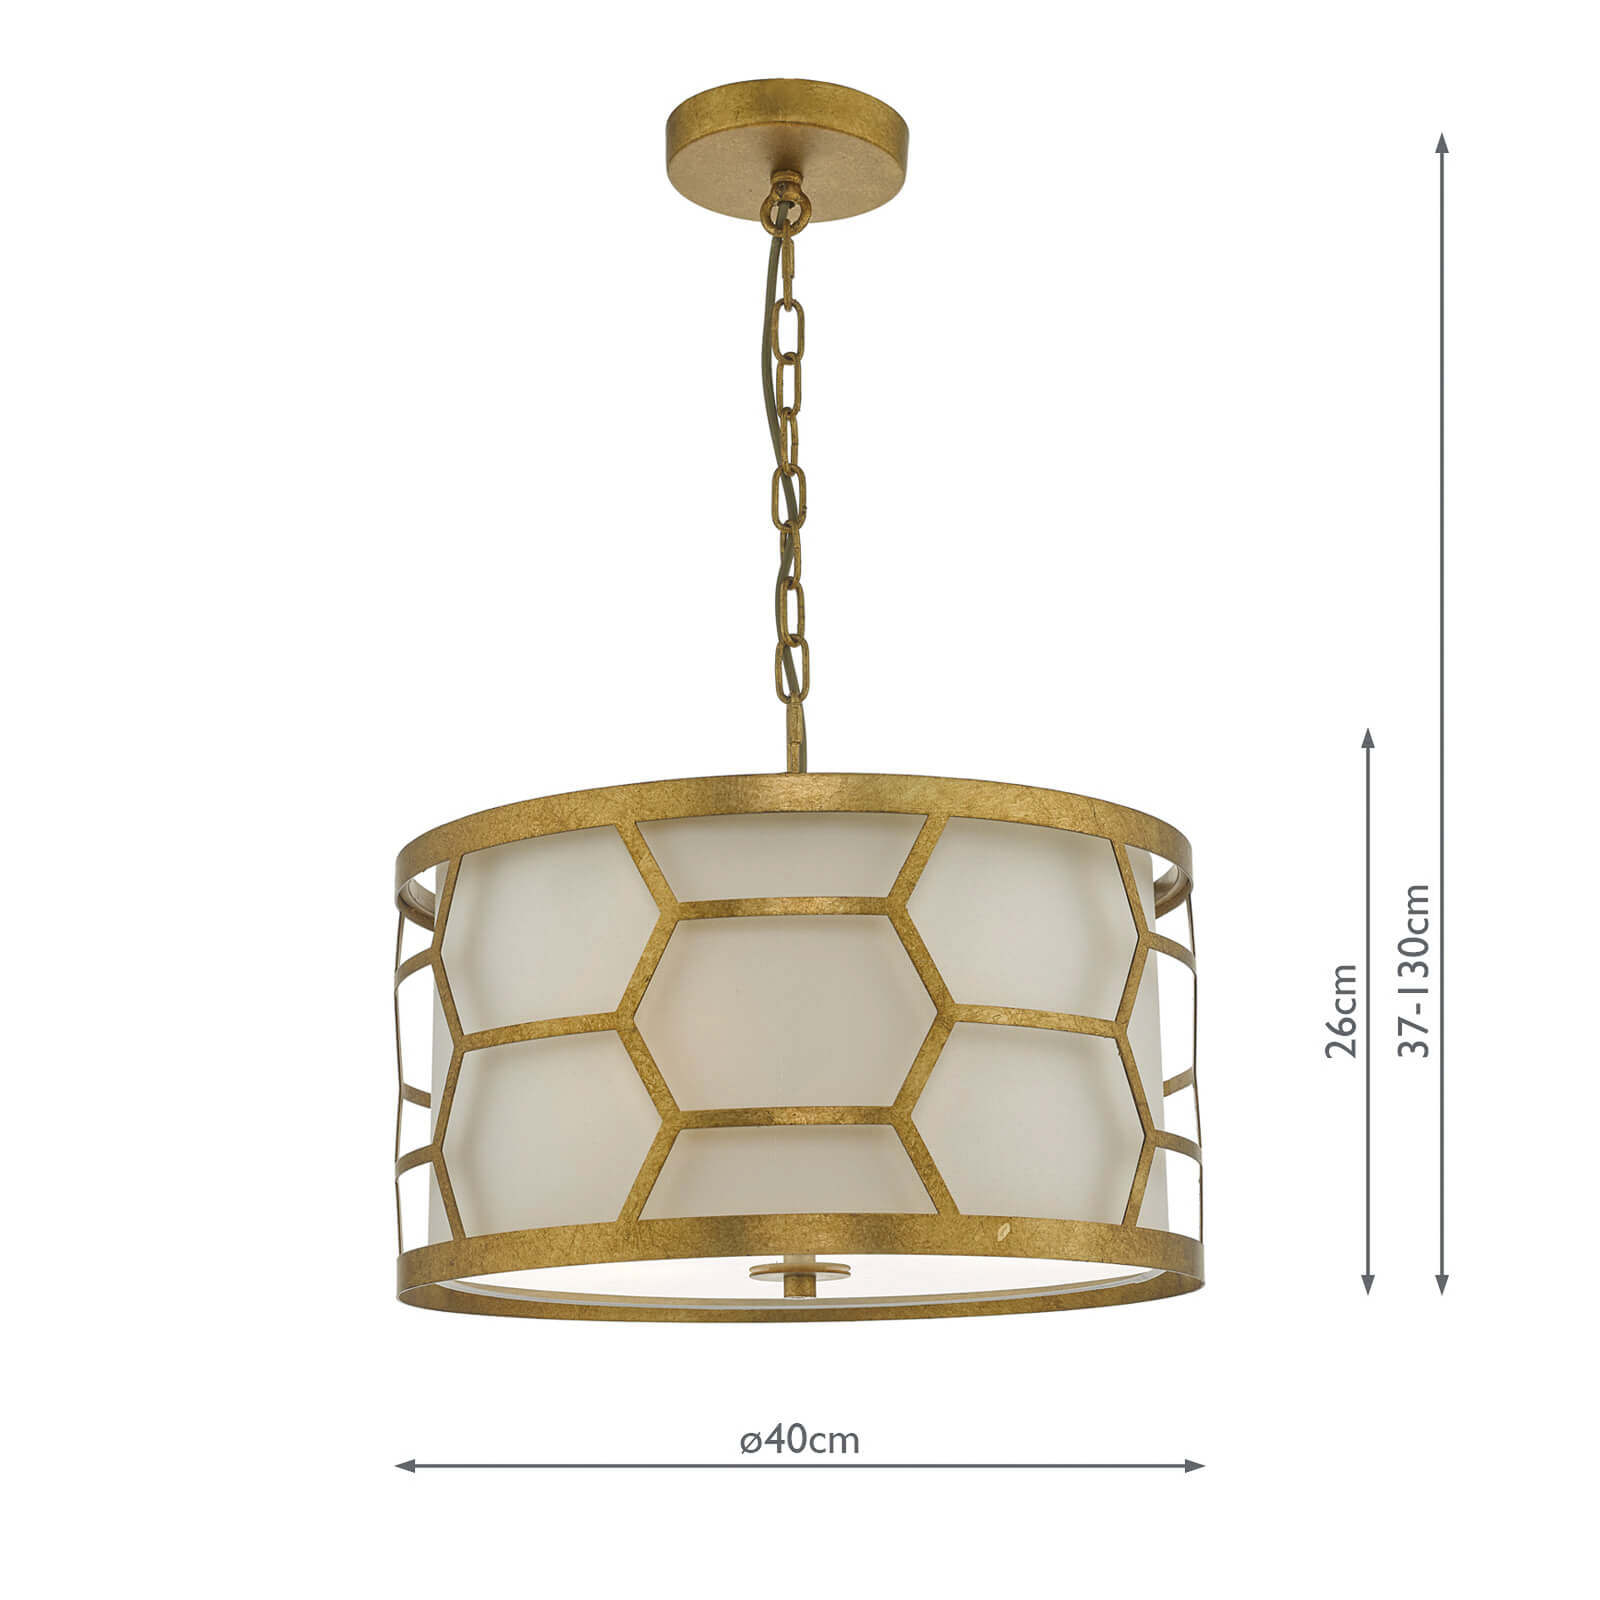 Epstein pendant light in gold and ivory, Ø 40cm